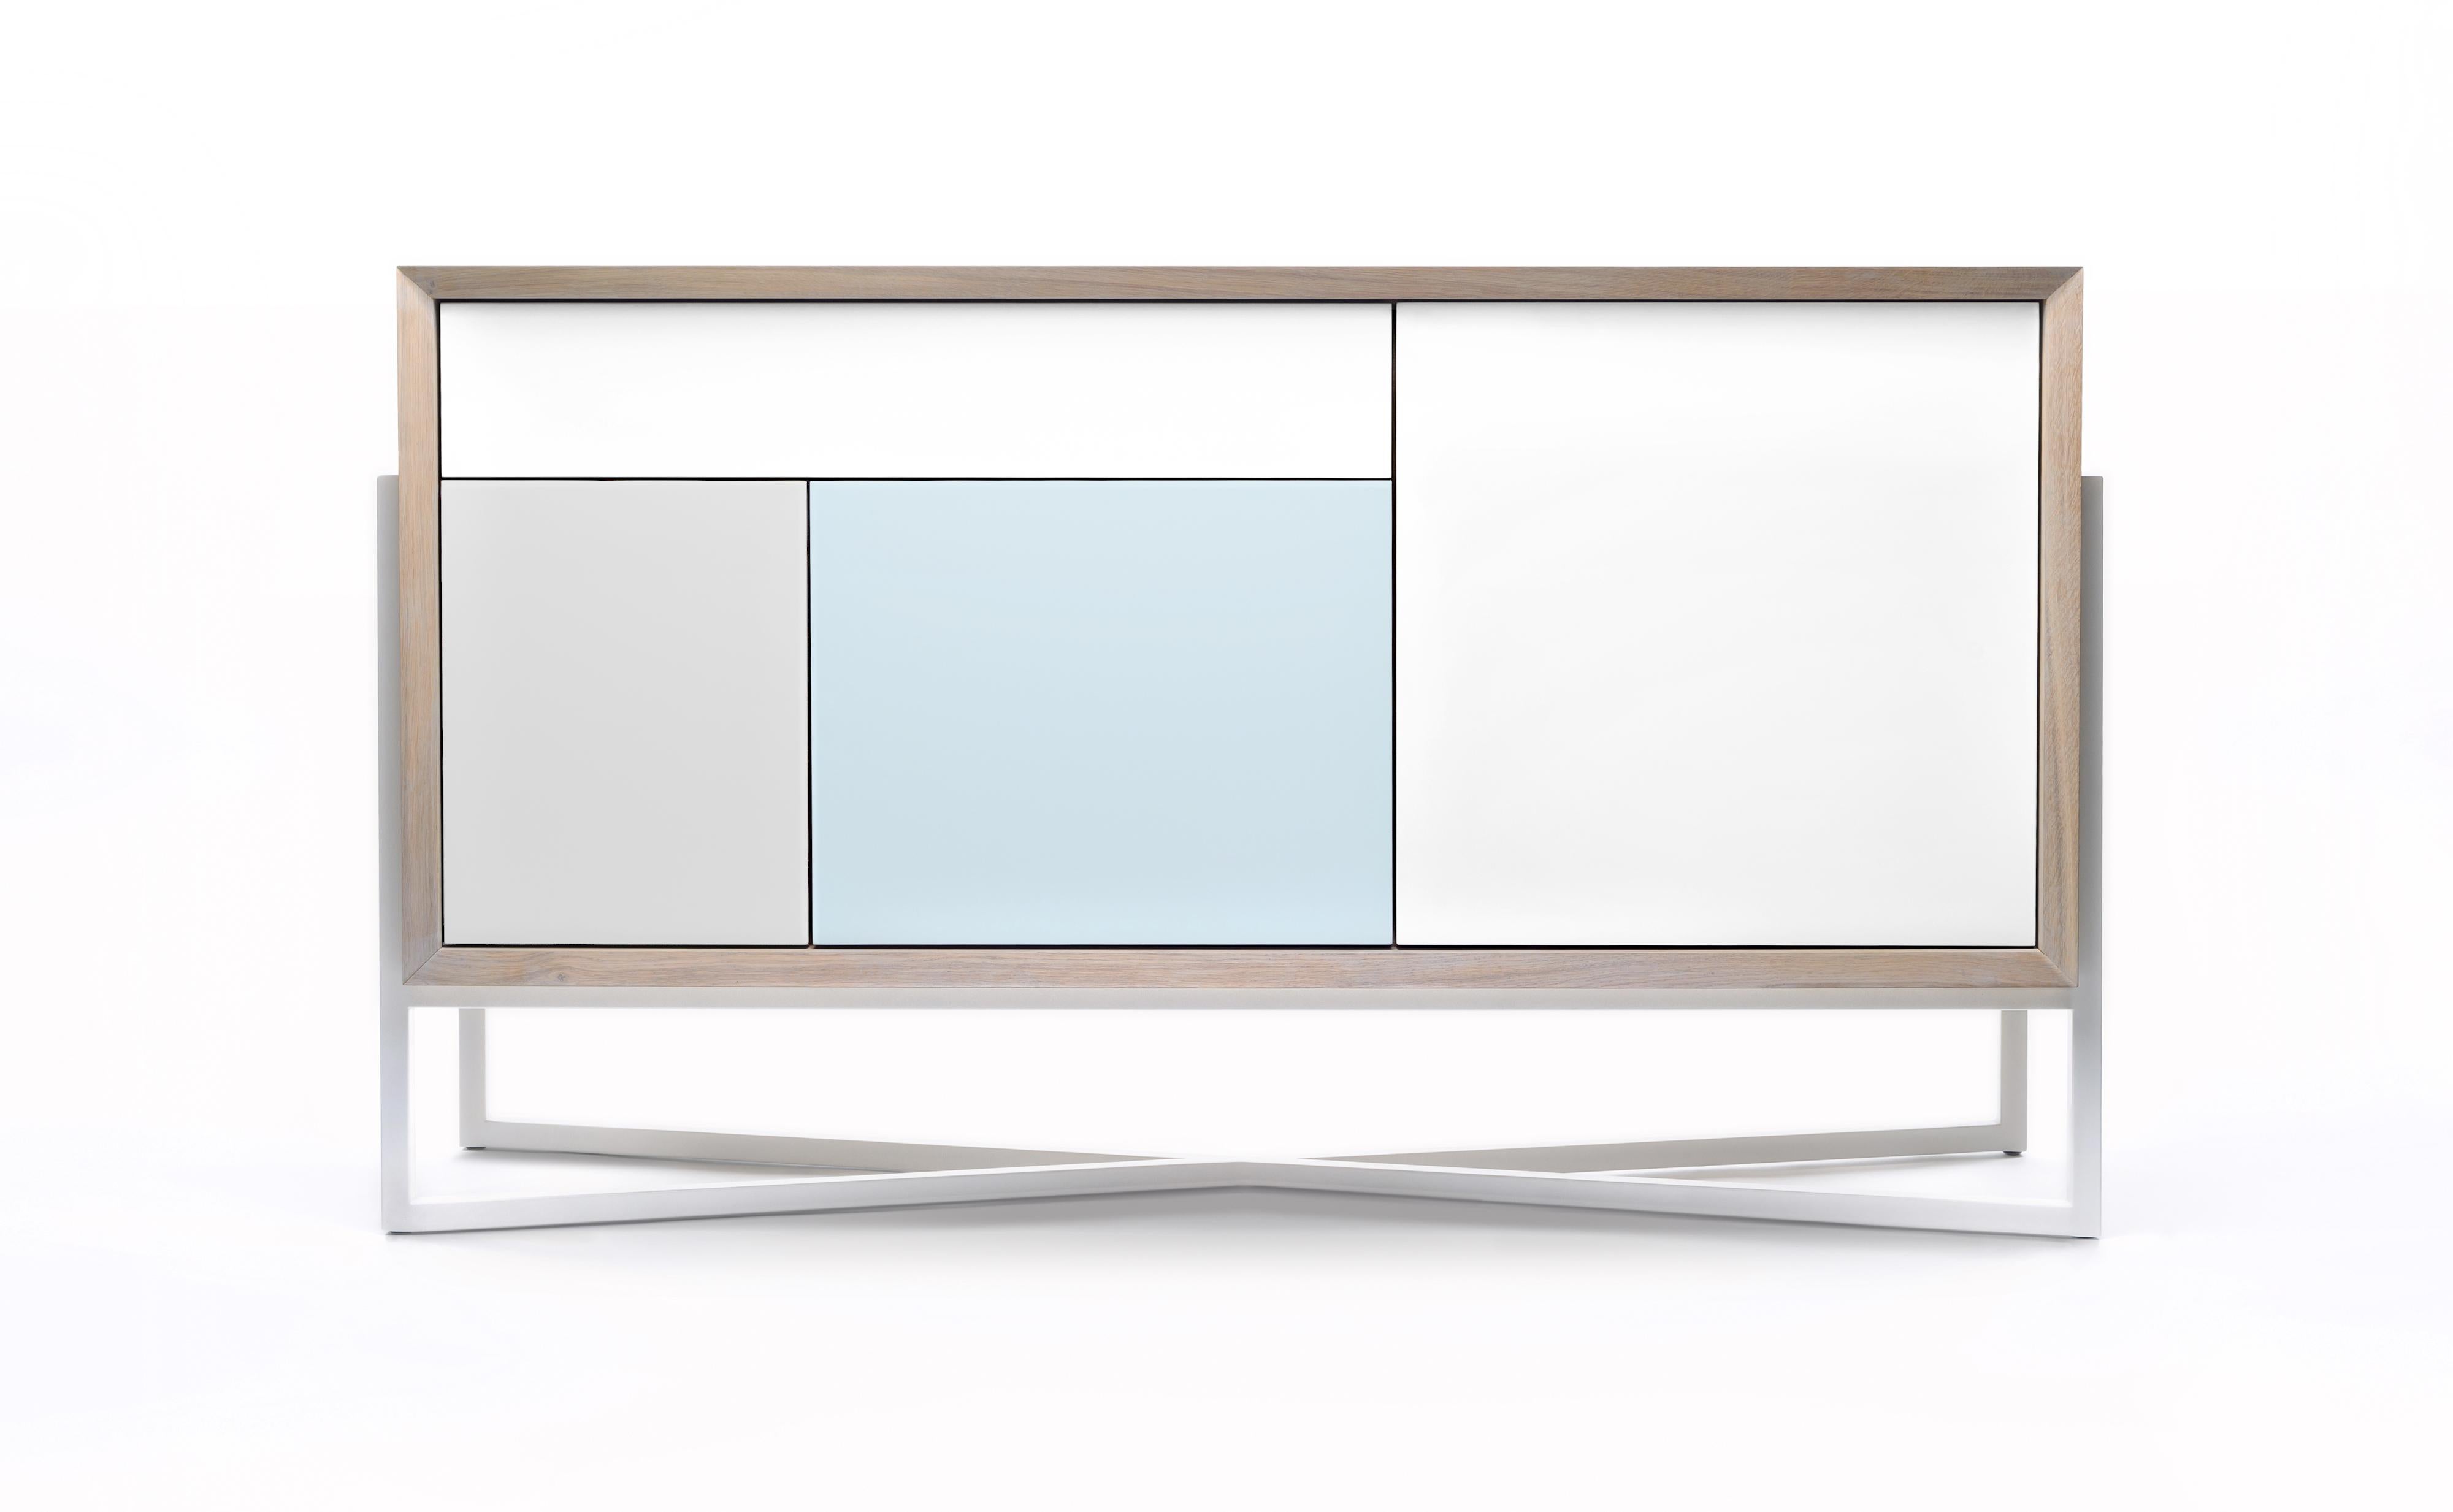 COMO cabinet by Phormy
Dimensions: D 44 x W 145 x H 80 cm.
Materials: bleached solid oak, bleached oak veneer, laquered fronts, powder coated steel base.

Different materials and sizes available.

COMO is an intriguing combination of